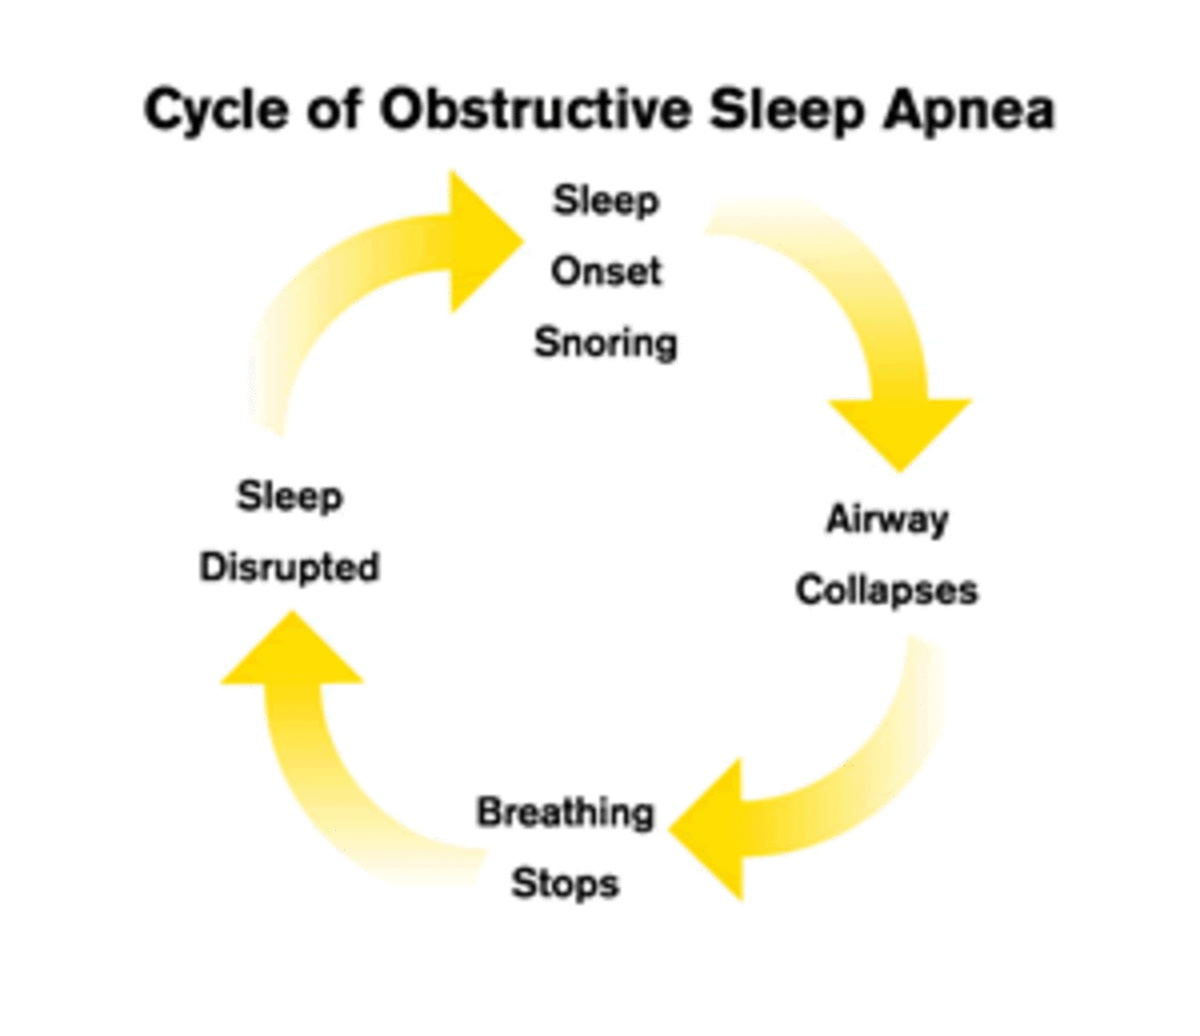 The sleep cycle of OSA shows how your sleep is interrupted. Your airway collapses, causing your breathing to stop, which disrupts your sleep.